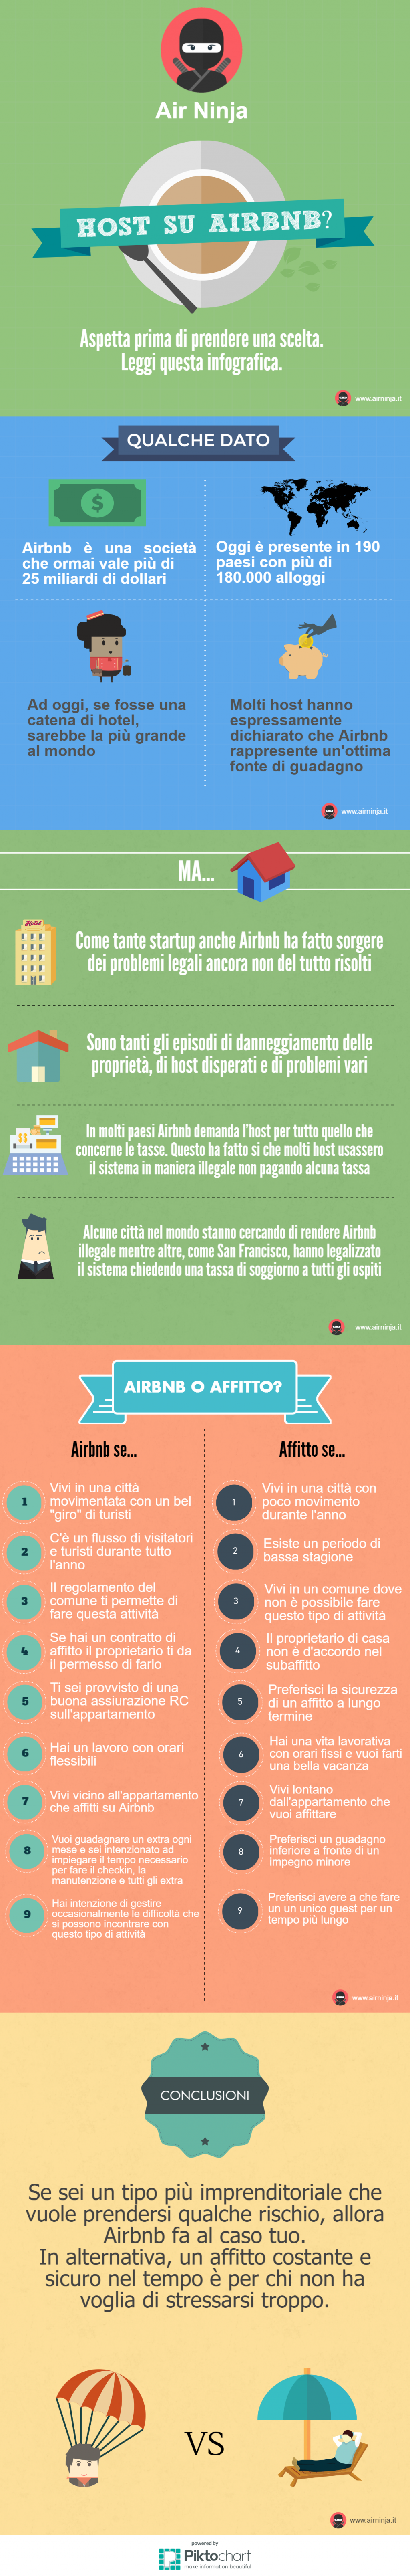 infografica-airbnb-o-affitto